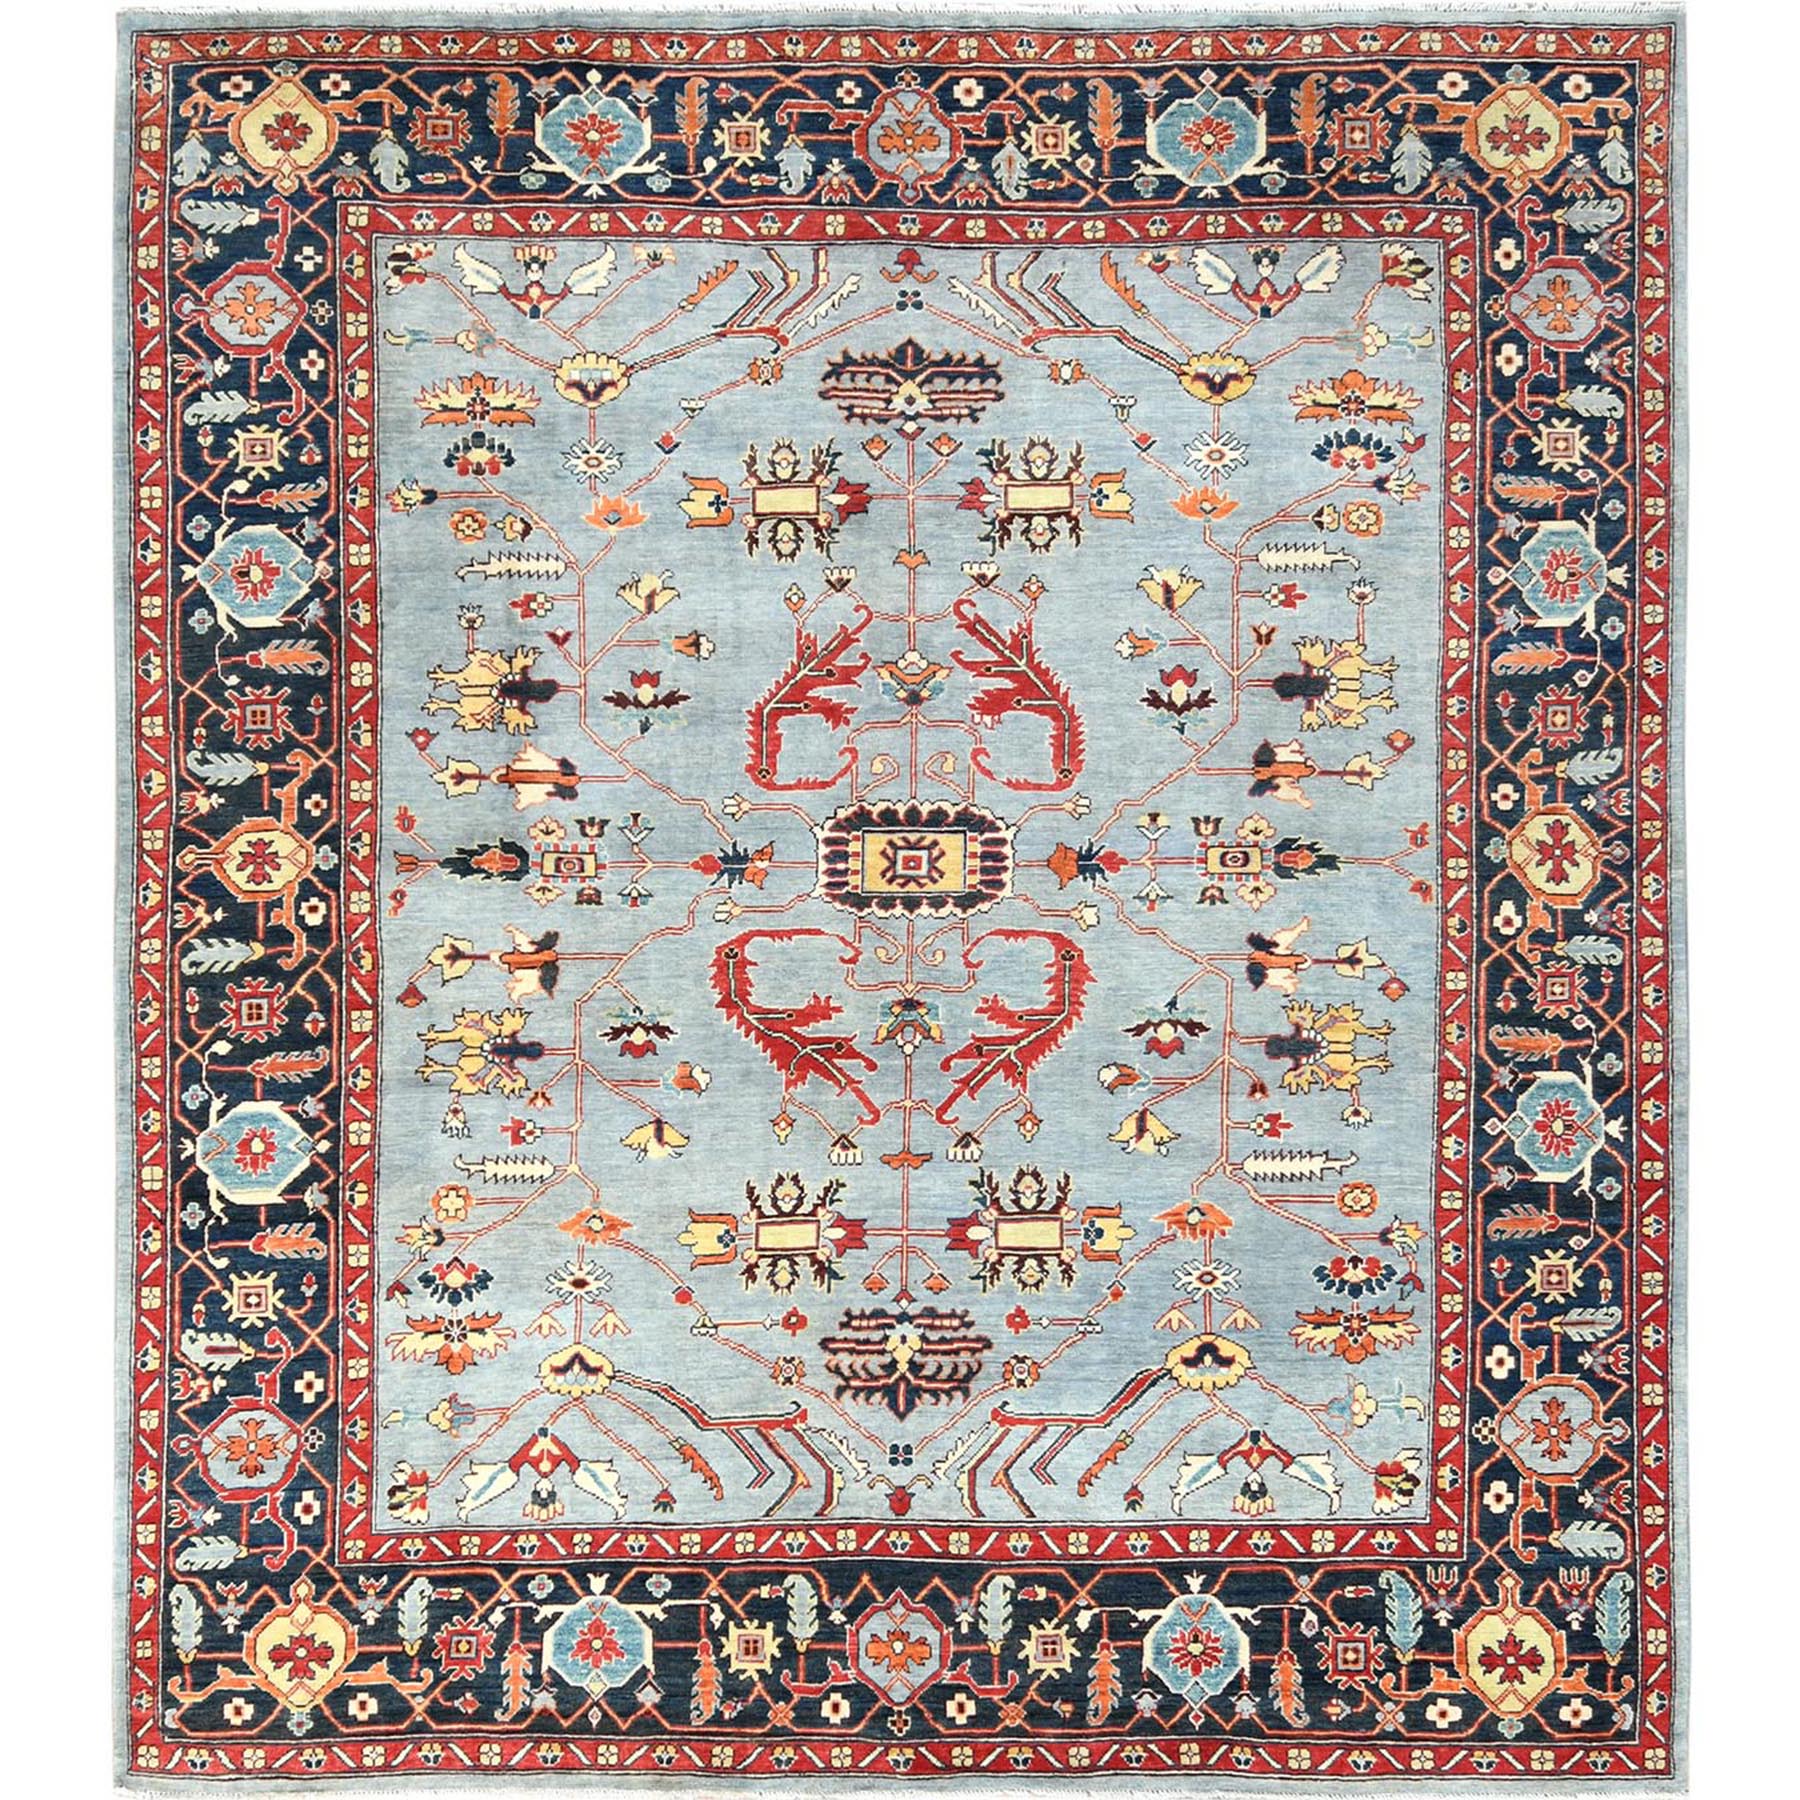  Wool Hand-Knotted Area Rug 8'4